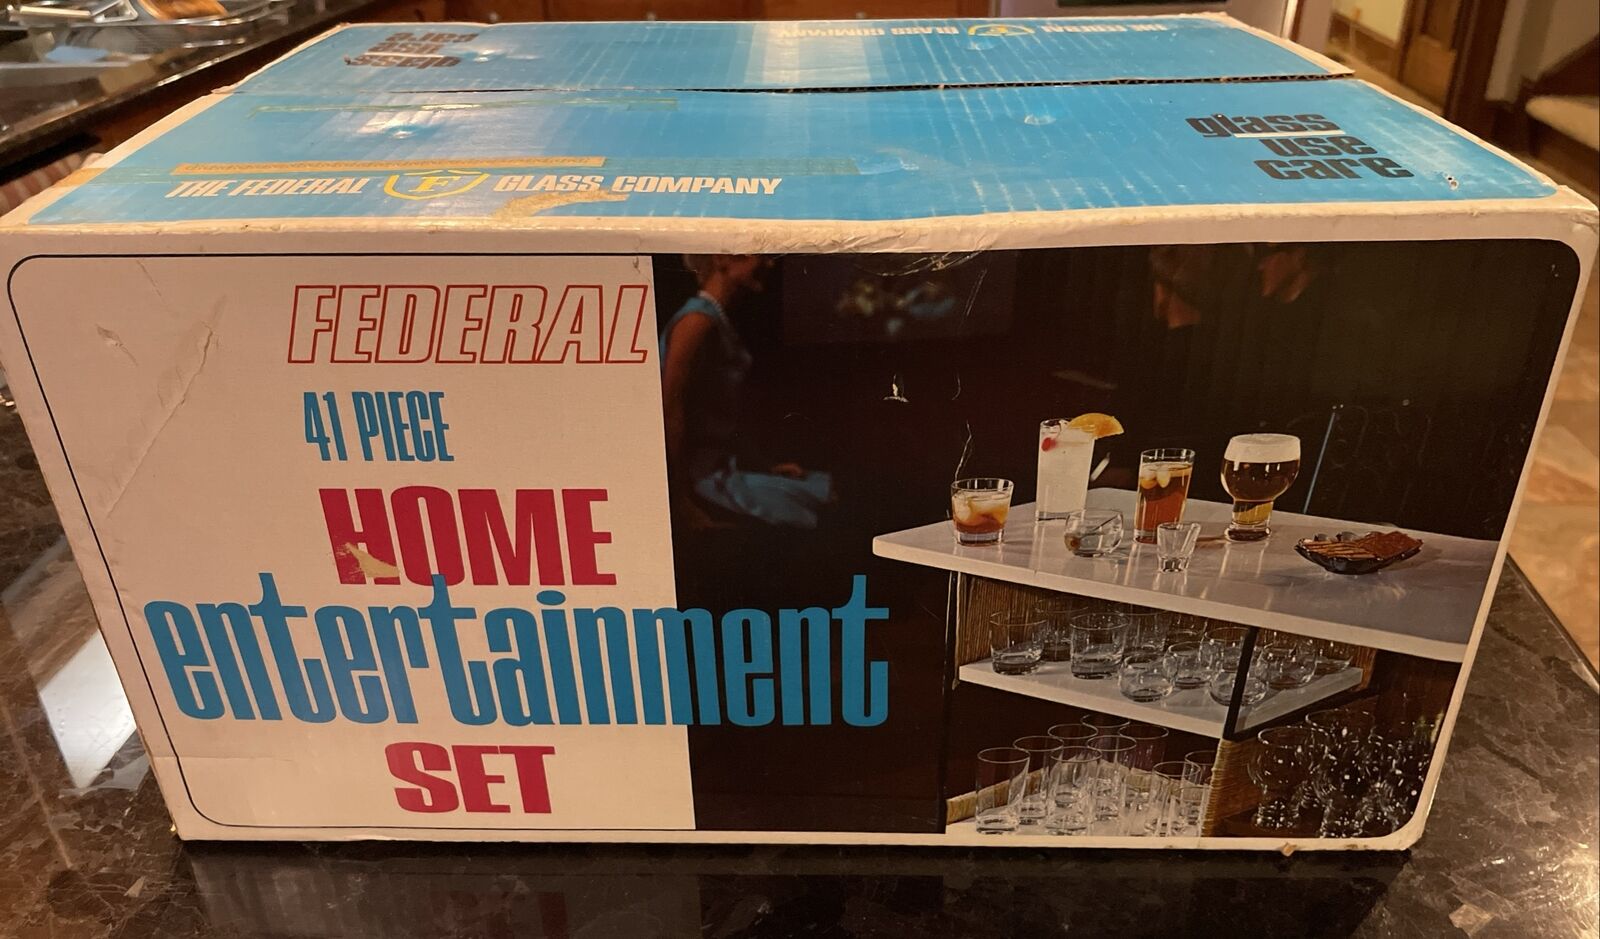 NOS Federal Glass Home Entertainment Set 41 Pieces T-623 Sealed